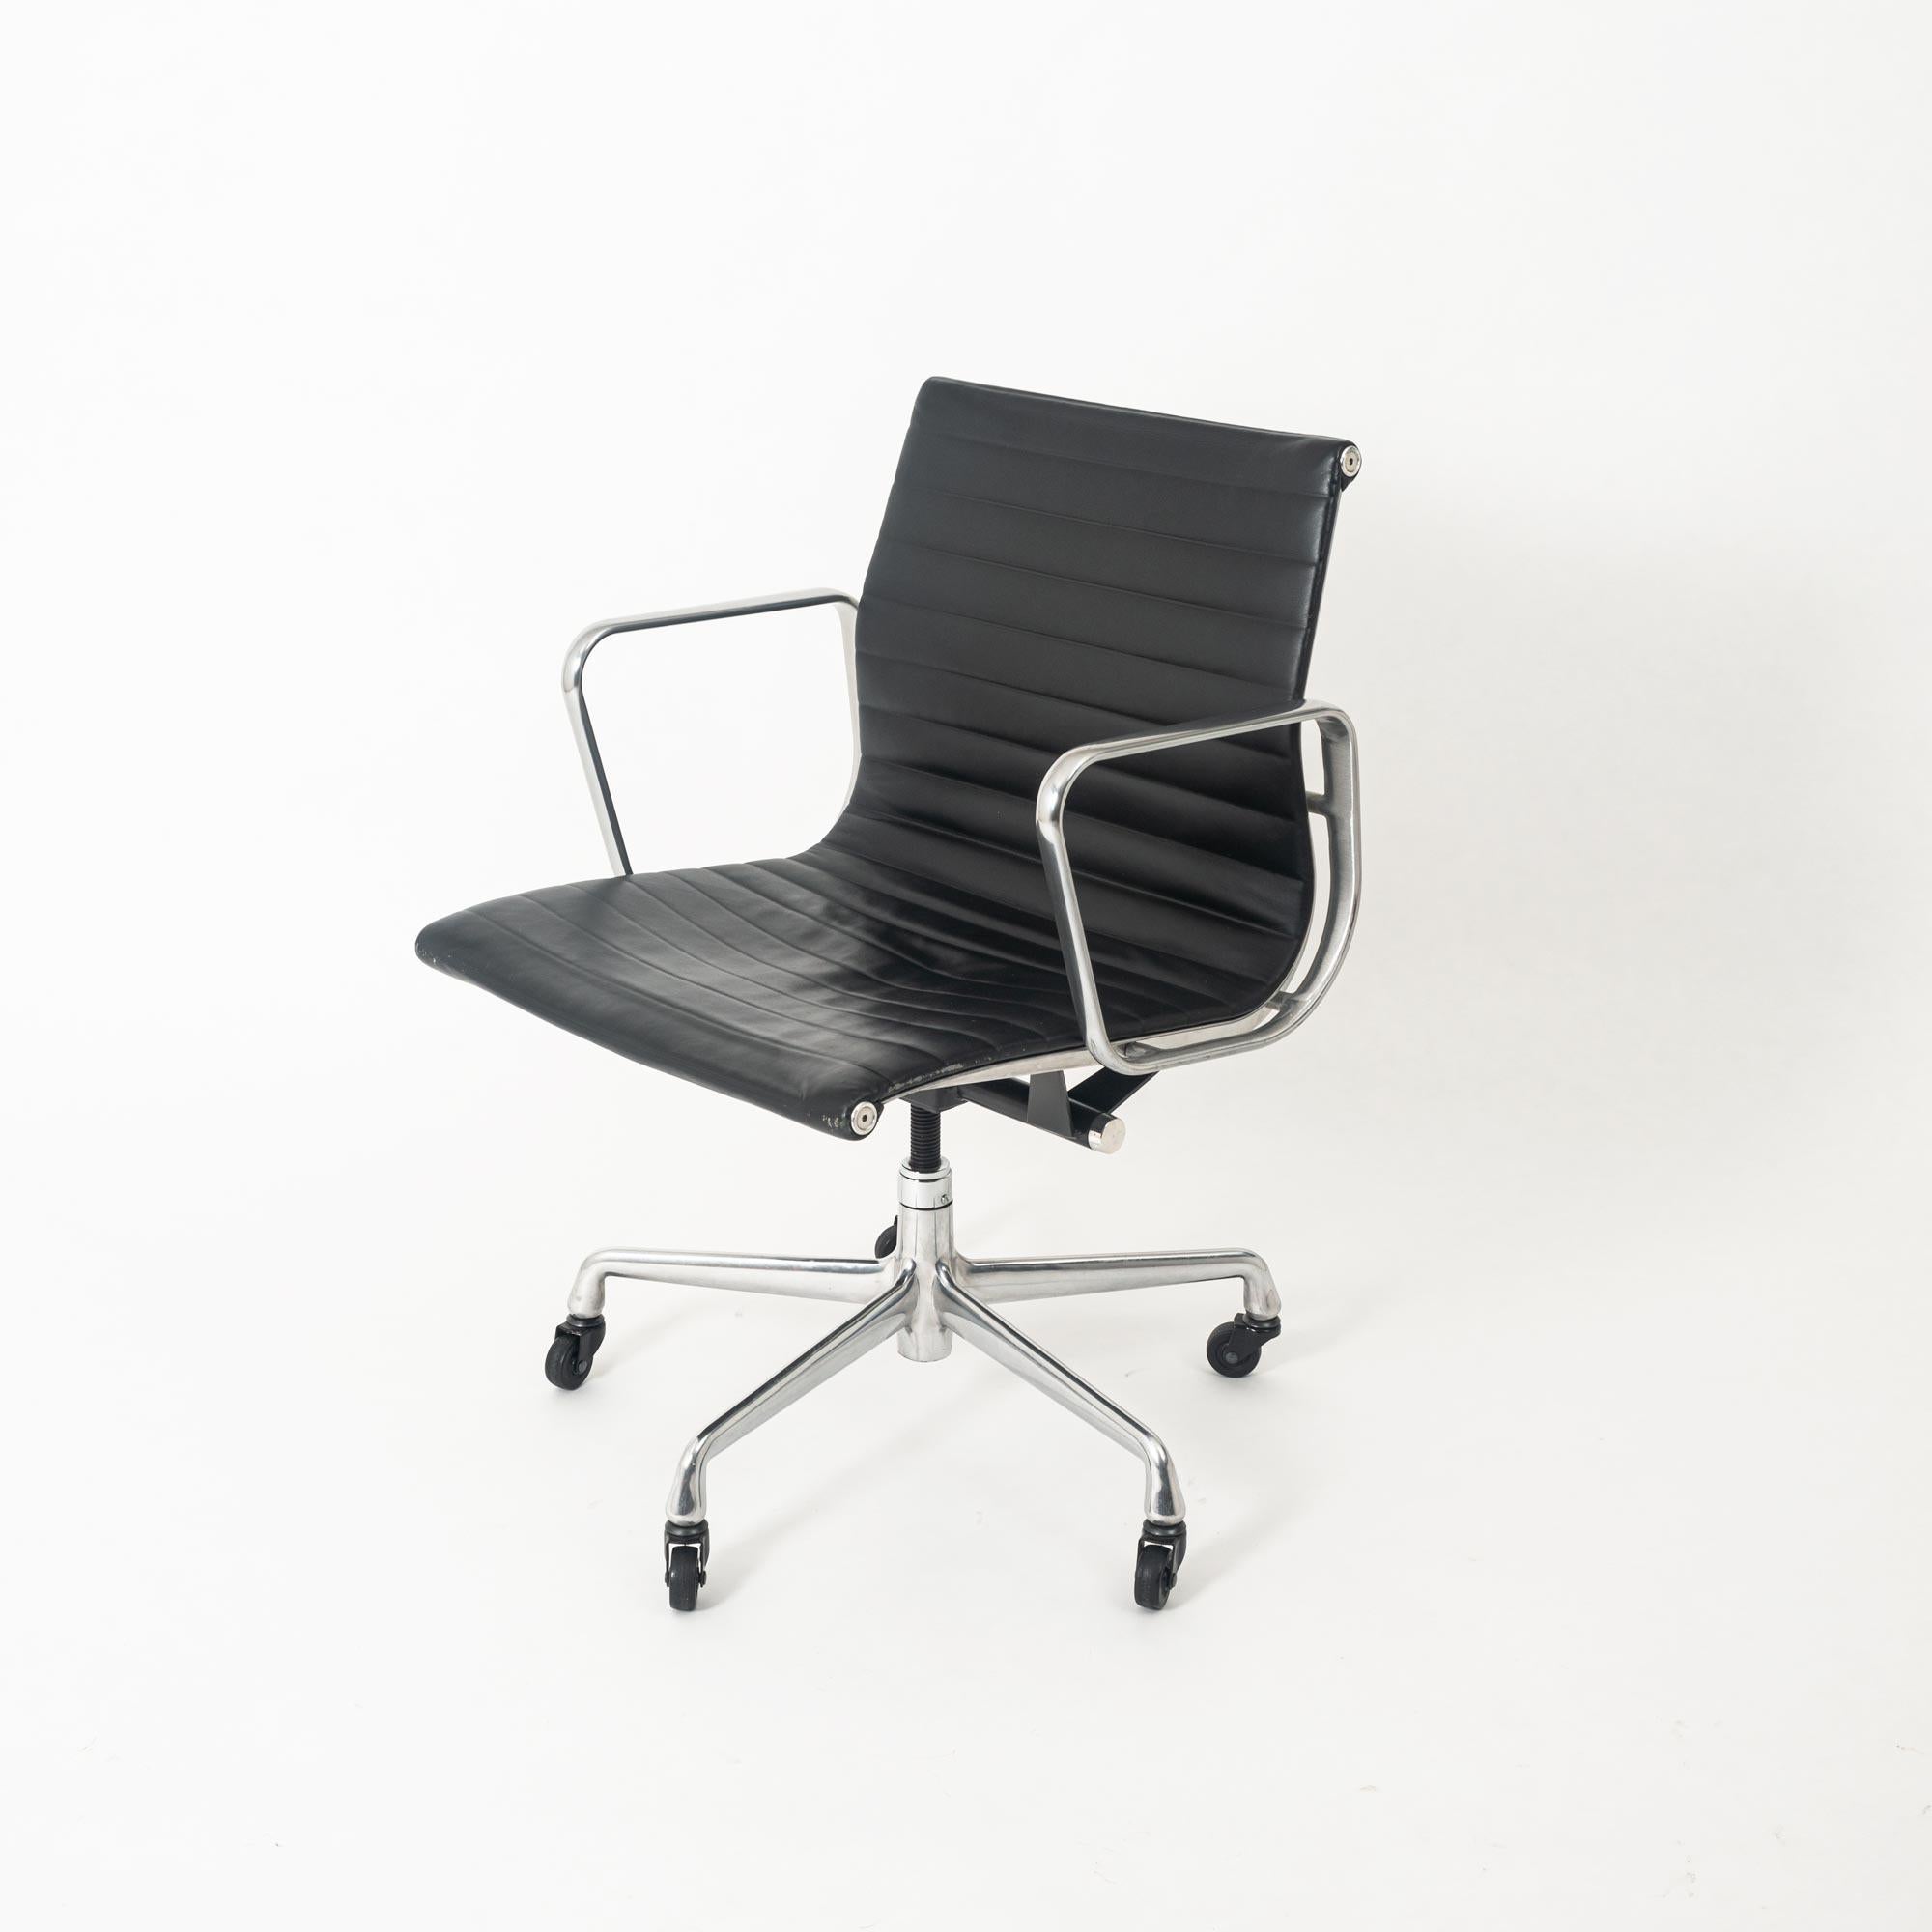 Designed by Charles and Ray Eames and offered by Herman Miller, this chair is as comfortable as it is a timeless classic. This Aluminum Group seat has a genuine black leather upholstery. The leather seat is a self-contouring, even weight